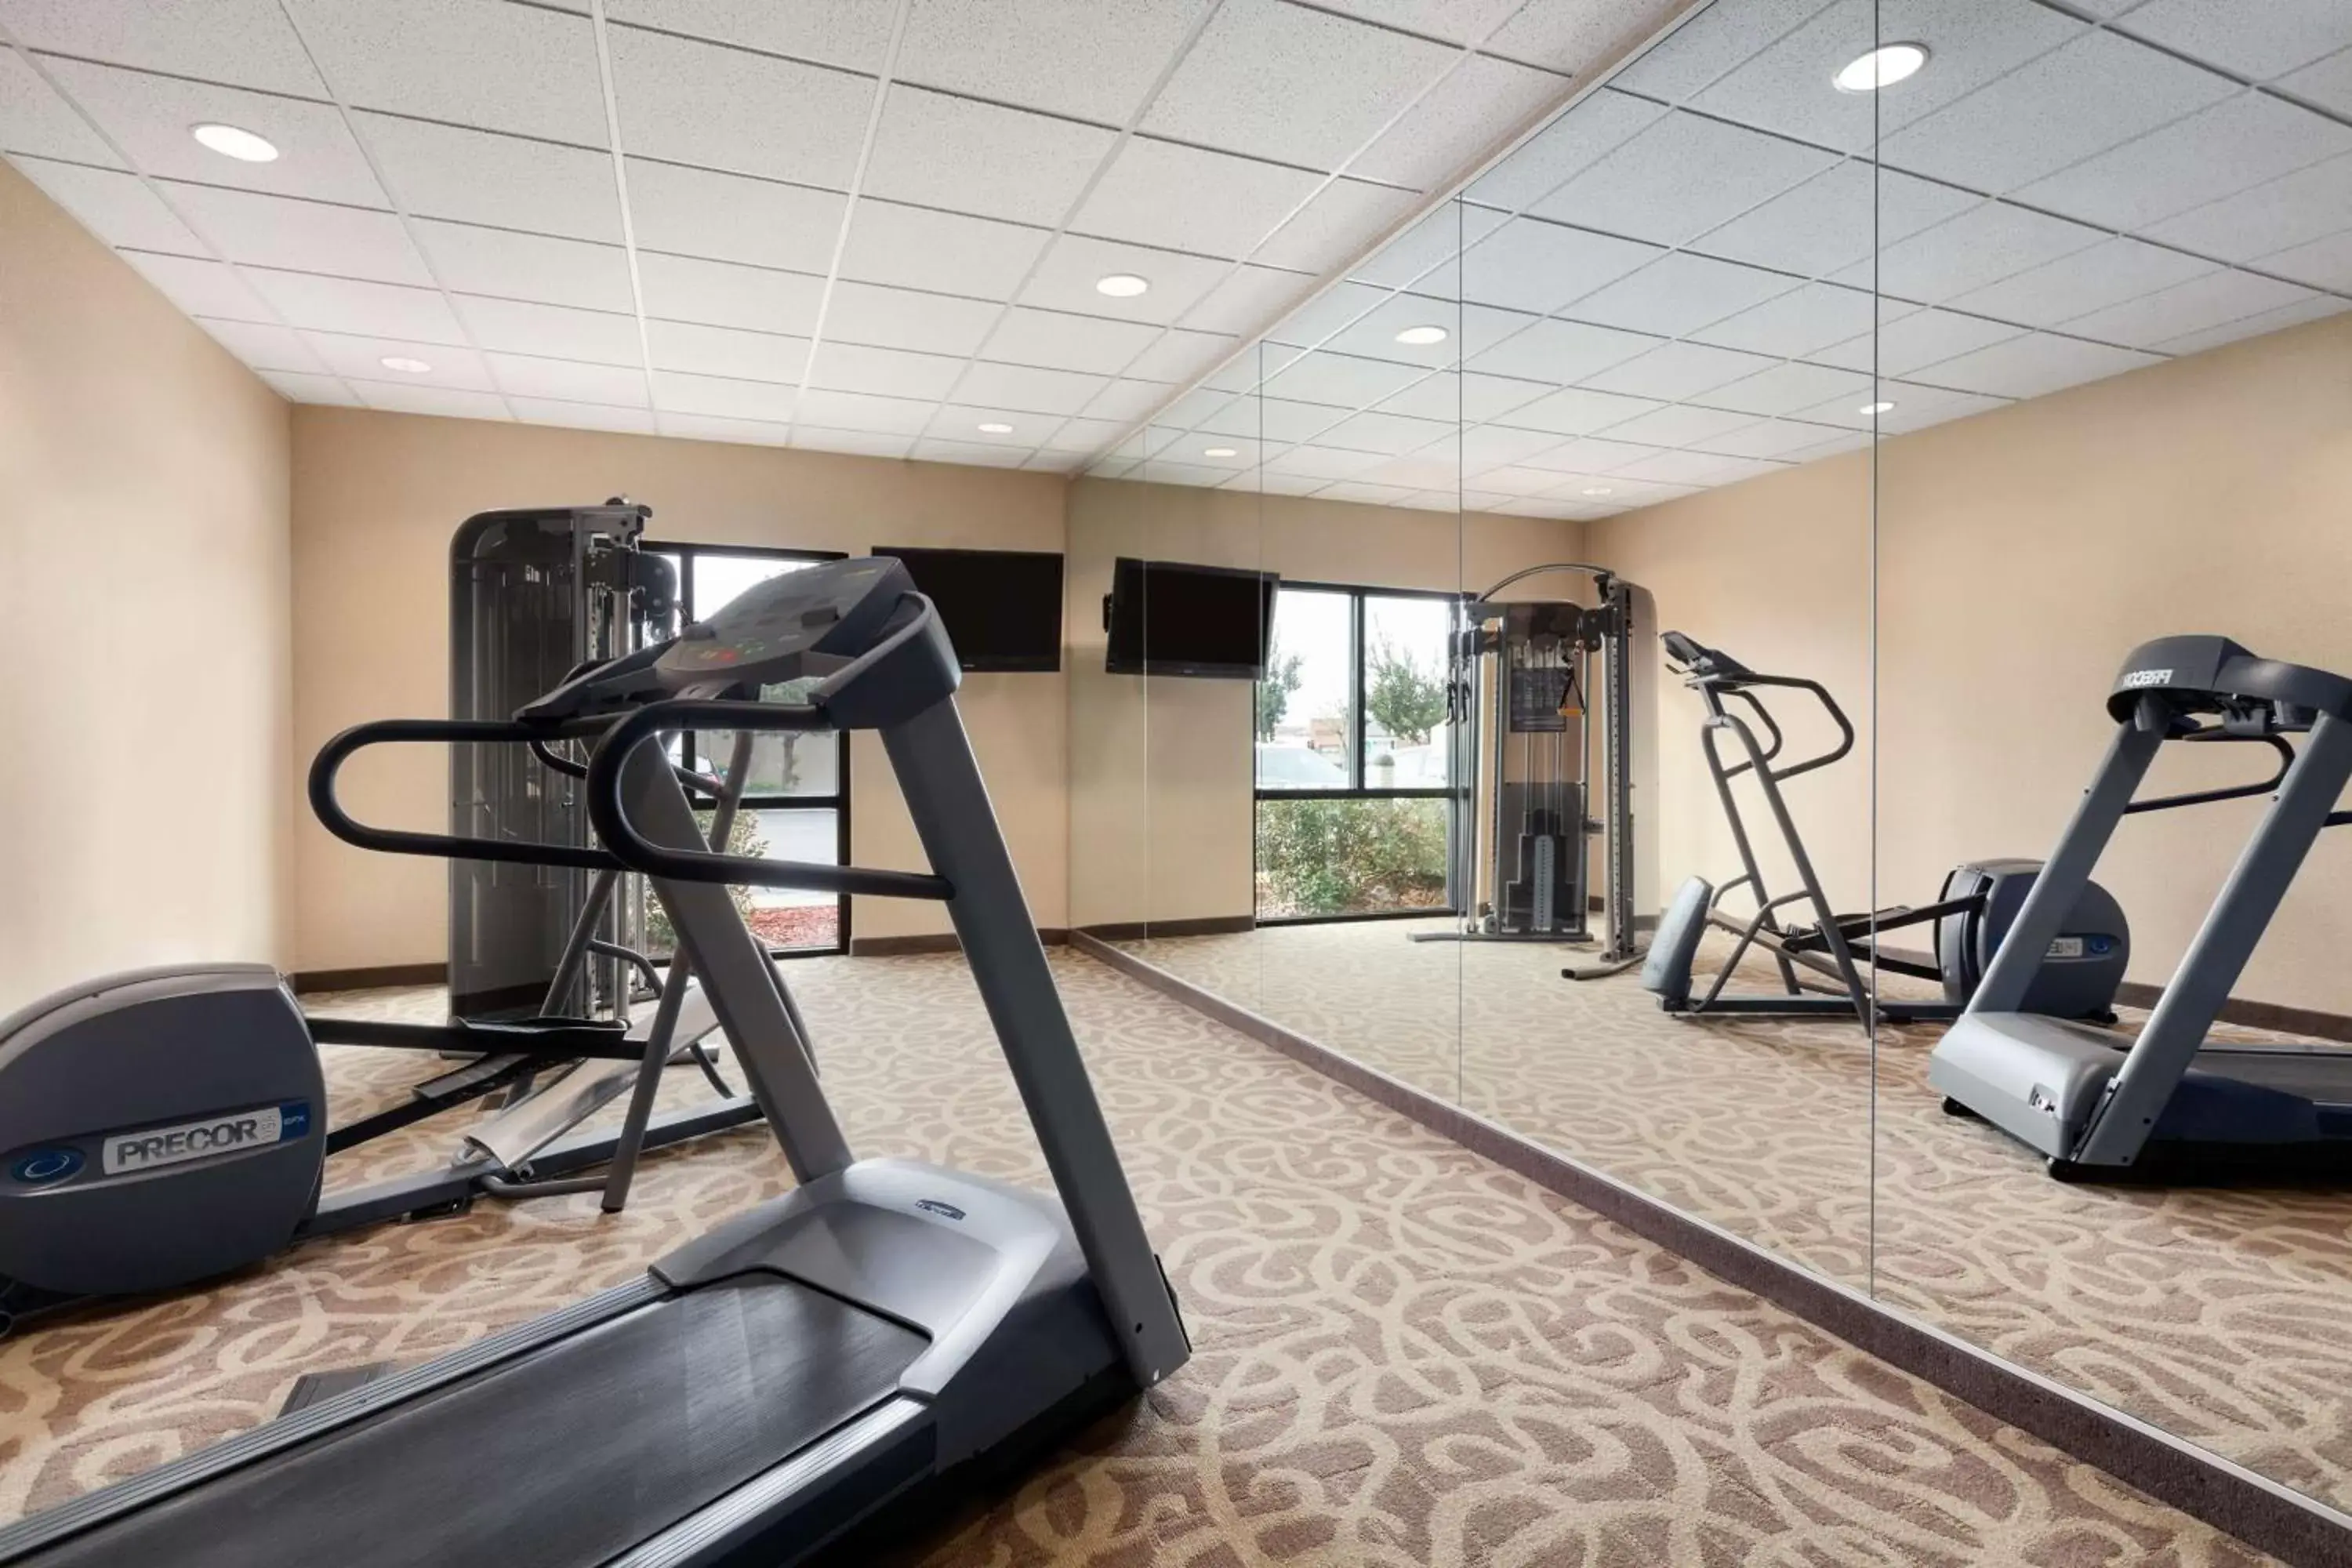 Activities, Fitness Center/Facilities in Country Inn & Suites by Radisson, Dixon, CA - UC Davis Area